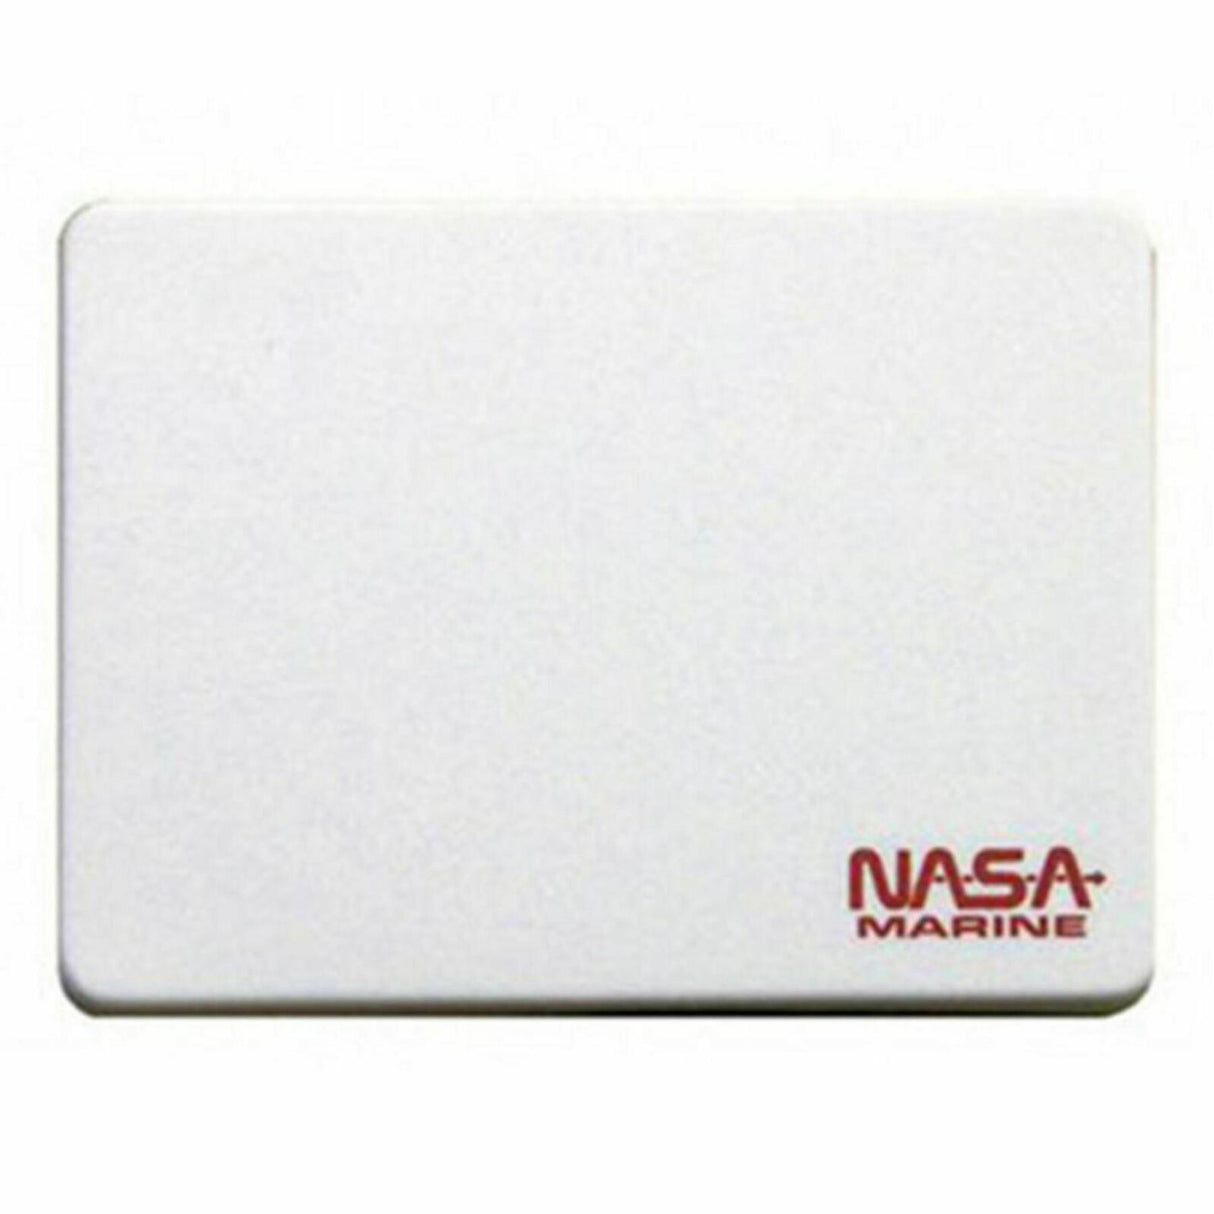 NASA Marine Weather Cover Protector for Target Instruments - TAR-COVER